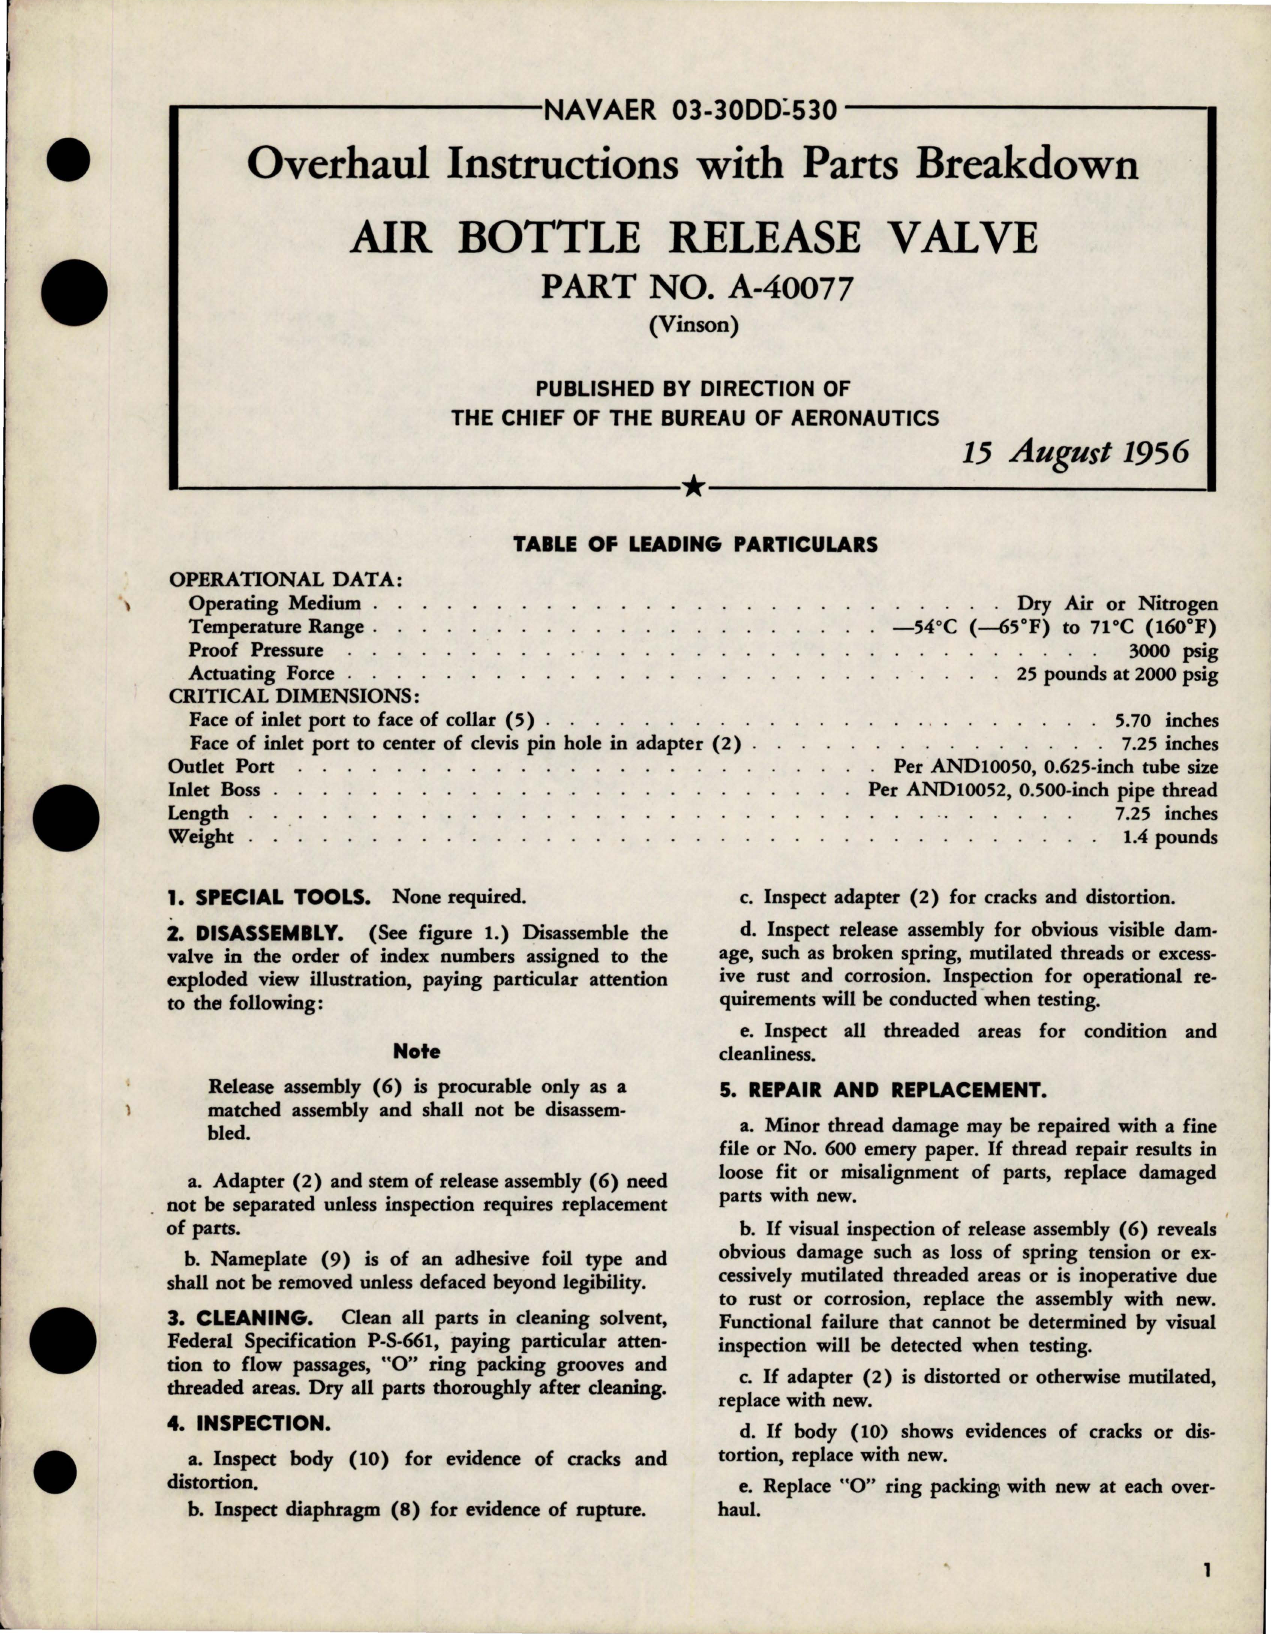 Sample page 1 from AirCorps Library document: Overhaul Instructions with Parts for Air Bottle Release Valve - Part A-40077